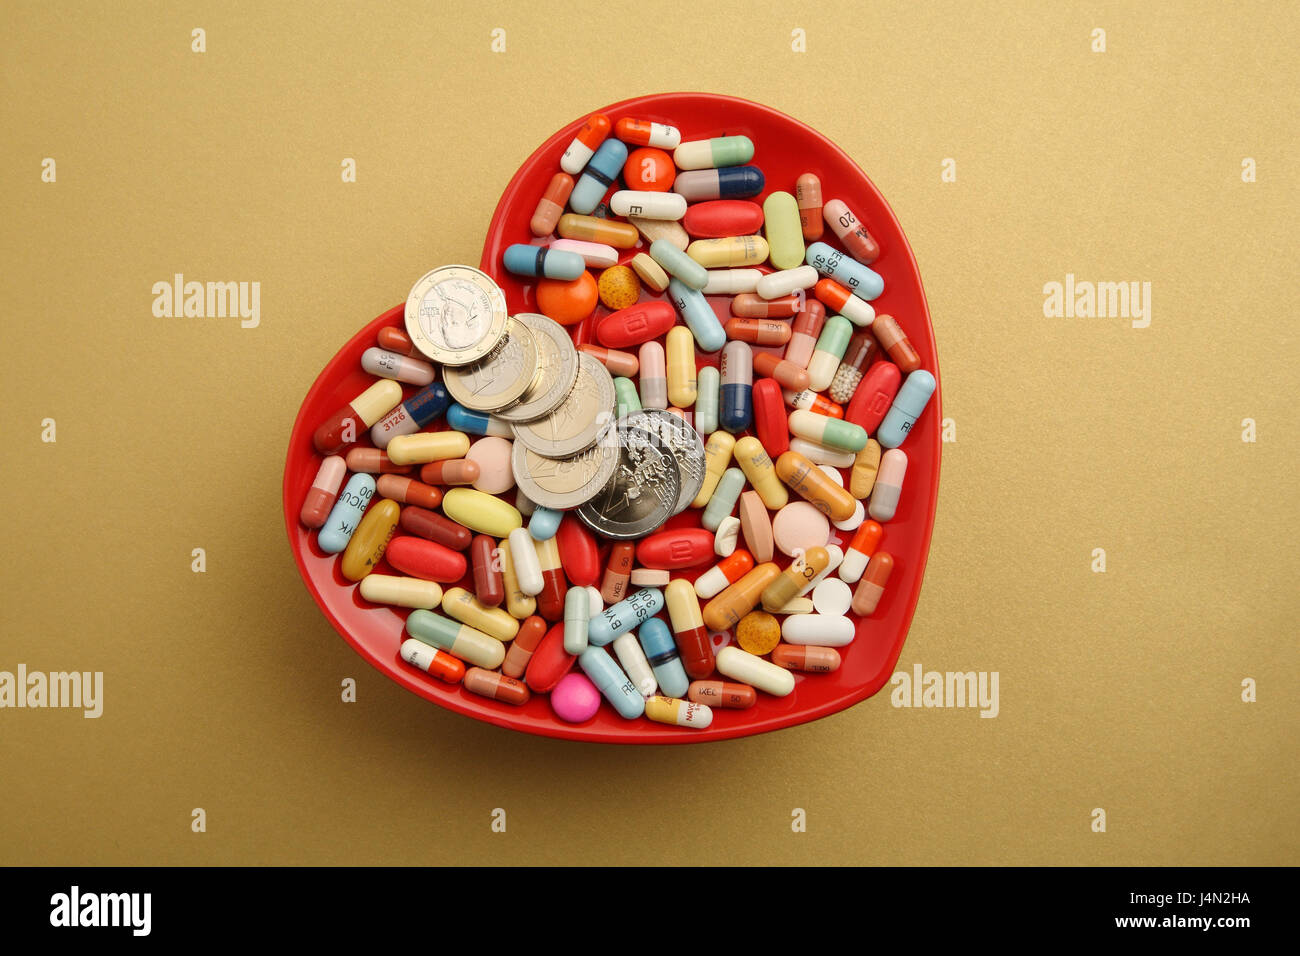 Peel, heart form, drugs, differently, money, coins, the pills, tablets, dragée, importantly to survival, Pharma, dose, overdose, health, disease, heart desease, heart ailment, heart, consumption, mania, tablet mania, brightly, medicine, change, icon, expenses, disease expenses, capacities, additional payment, studio, copy square, object photography, Stock Photo